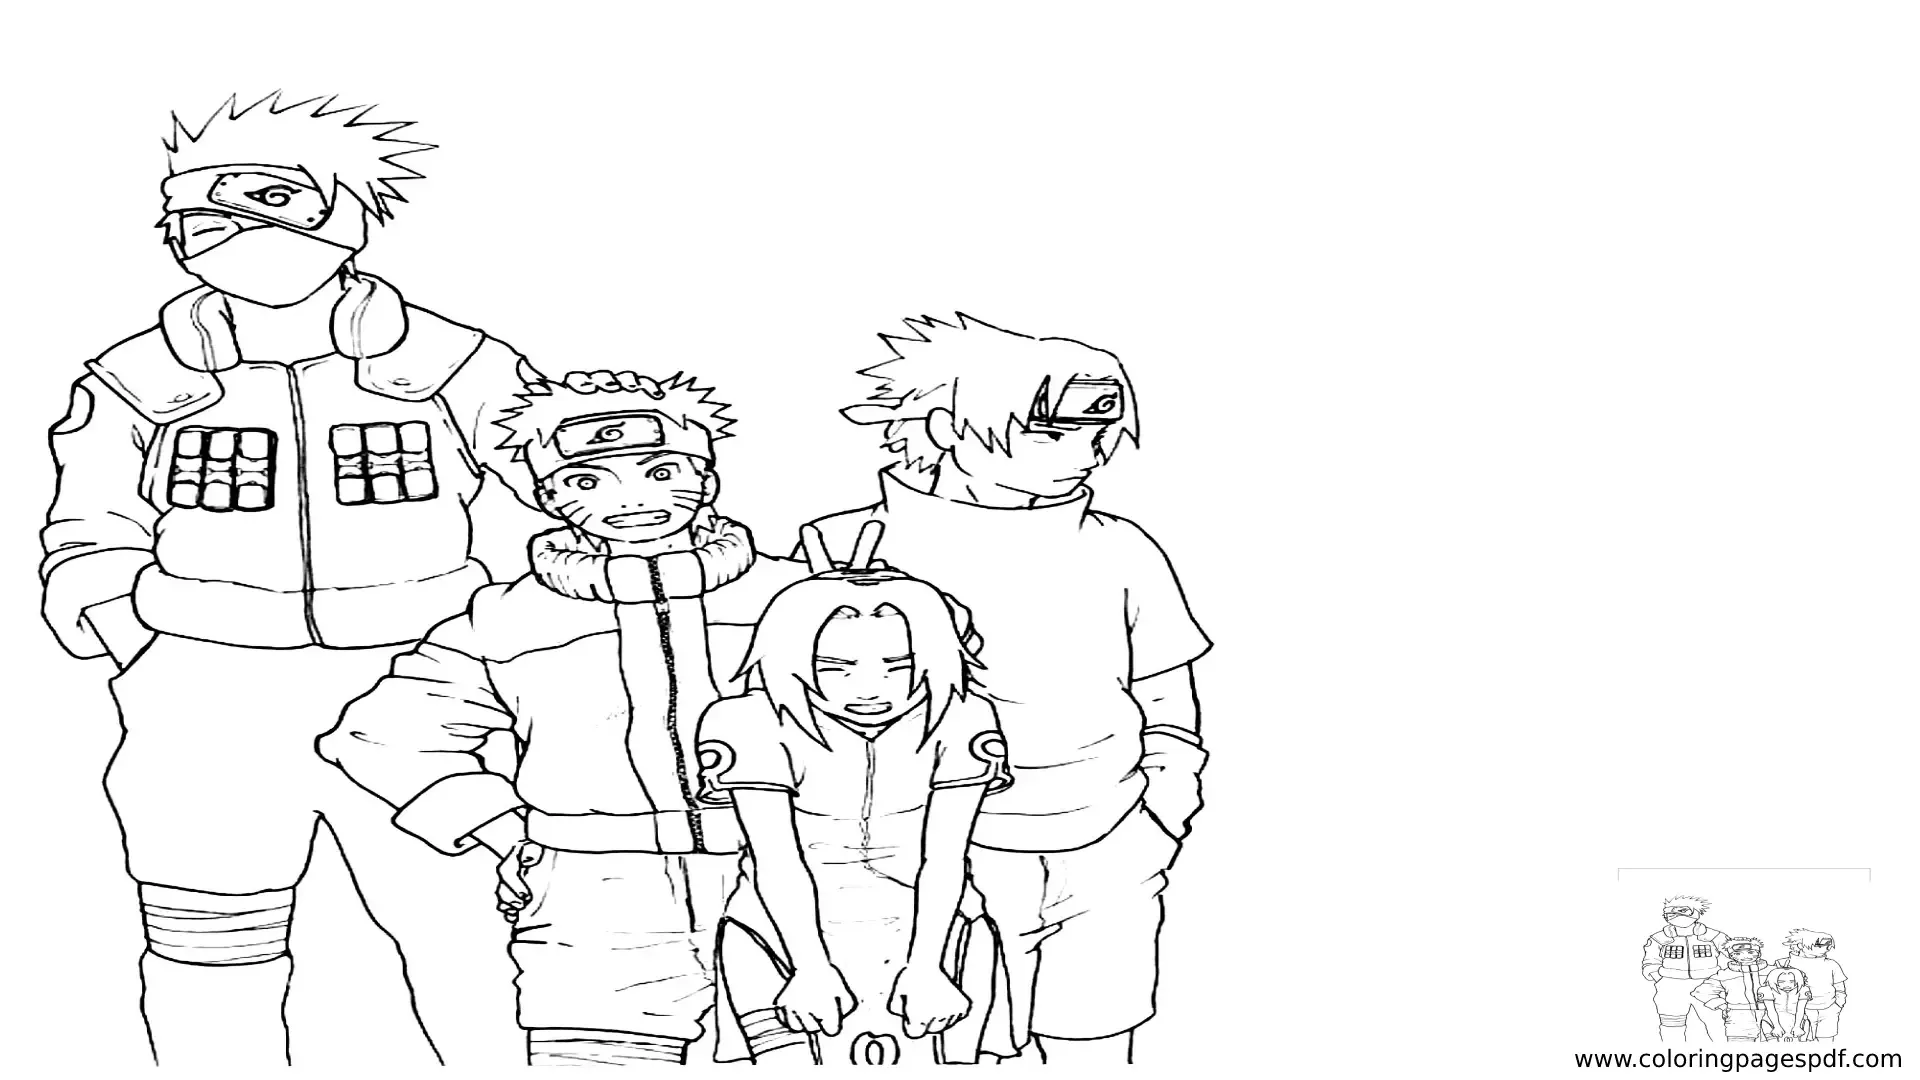 Coloring Page Of Team 7